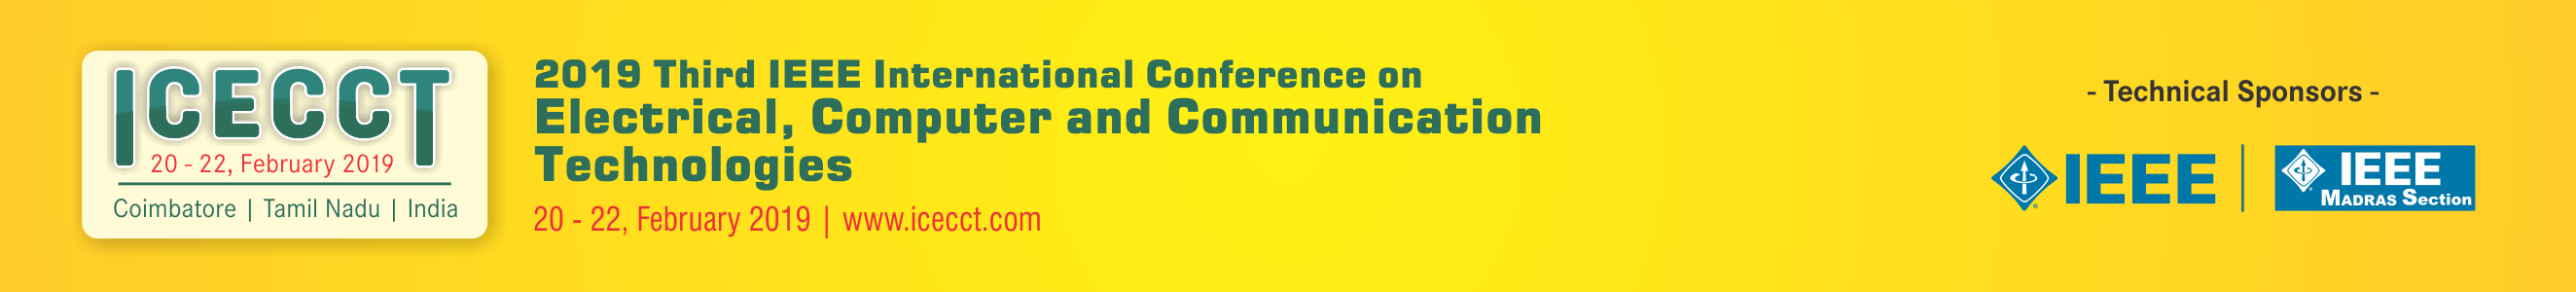 2019 Third IEEE International Conference on Electrical, Computer and Communication Technologies ICECCT 2019